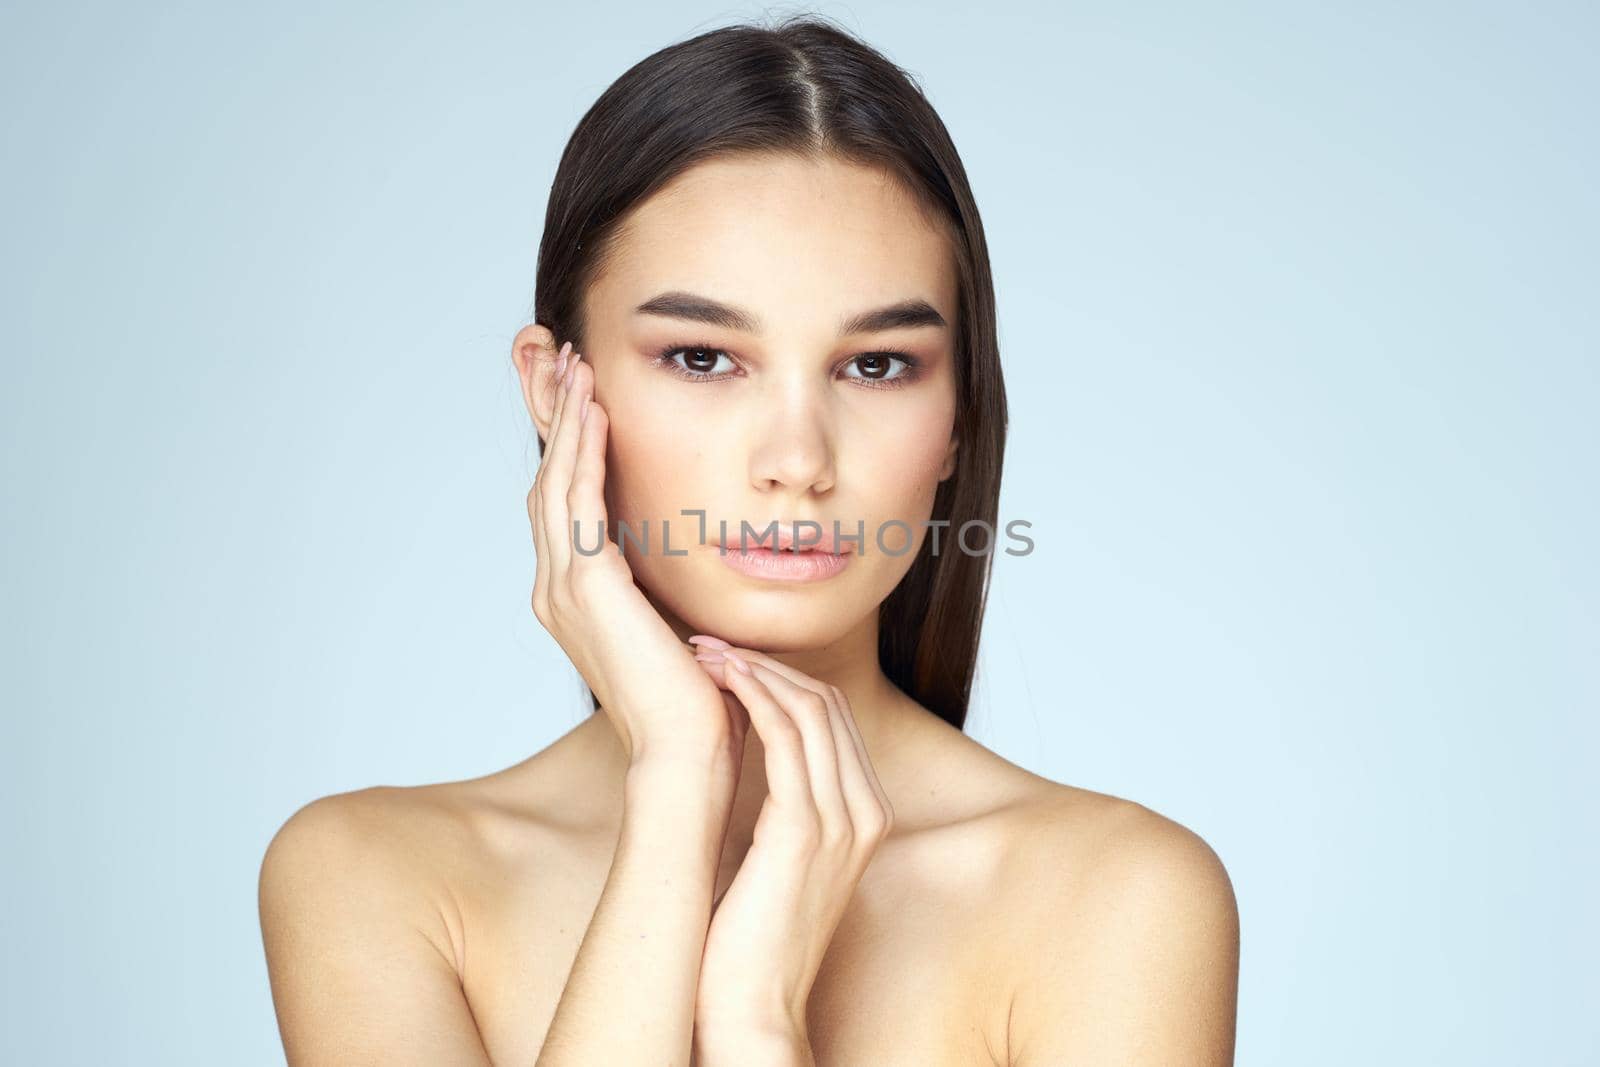 Woman with naked shoulders long hair clean skin cropped view blue background by SHOTPRIME